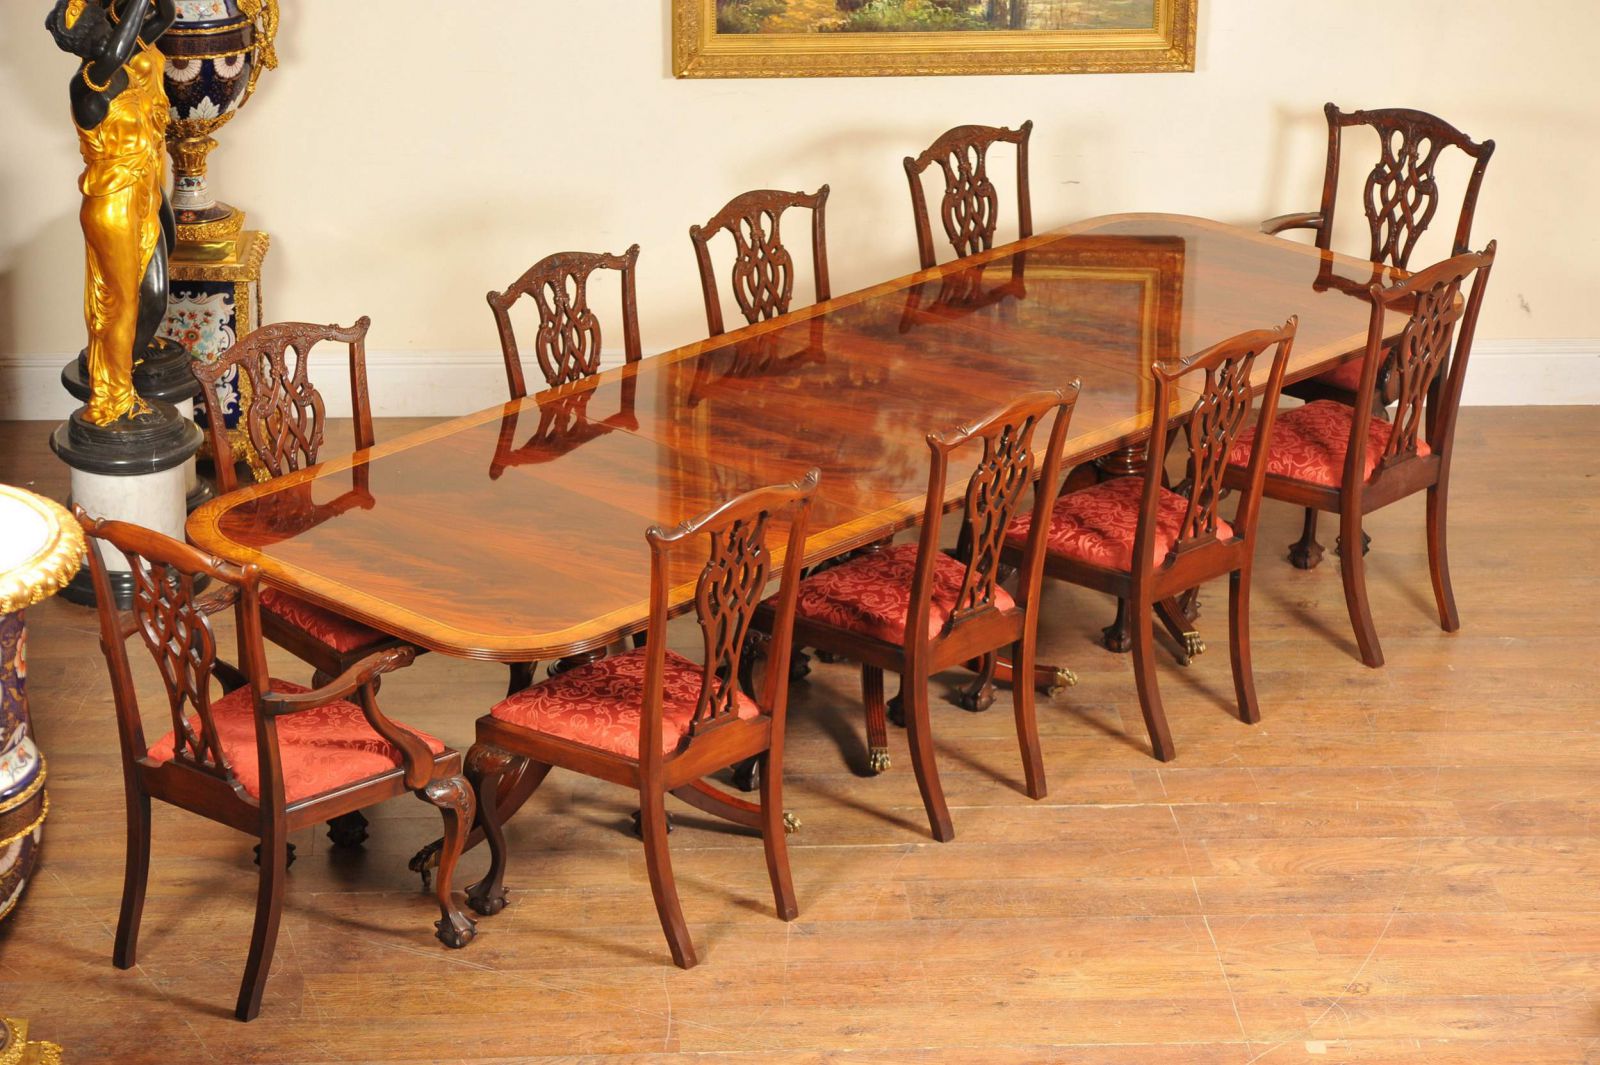 Flame mahogany Regency table and matching set of Chippendale chairs